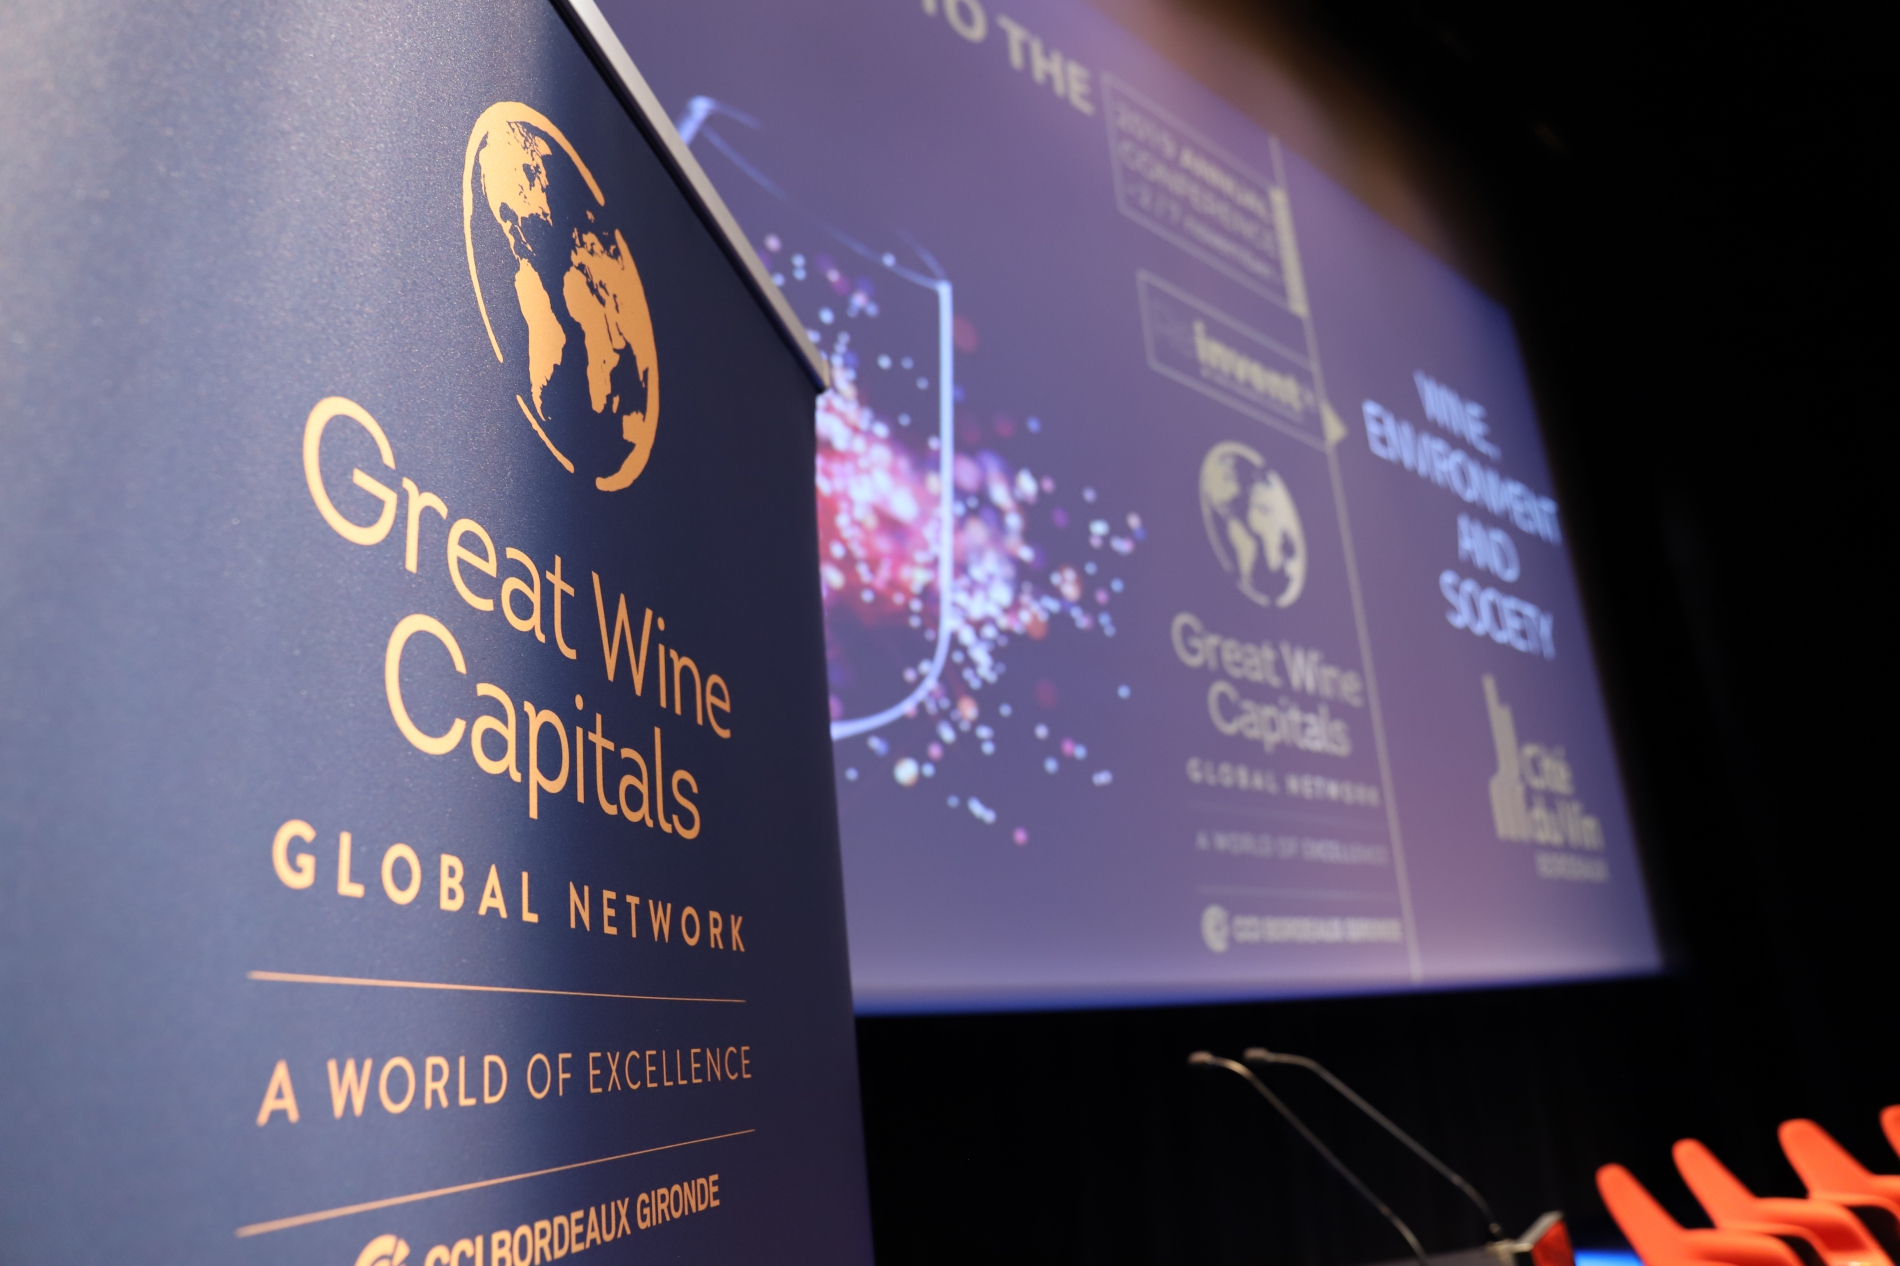 Climate change in the spotlight of the 20th edition of the Great Wine Capitals annual conferences